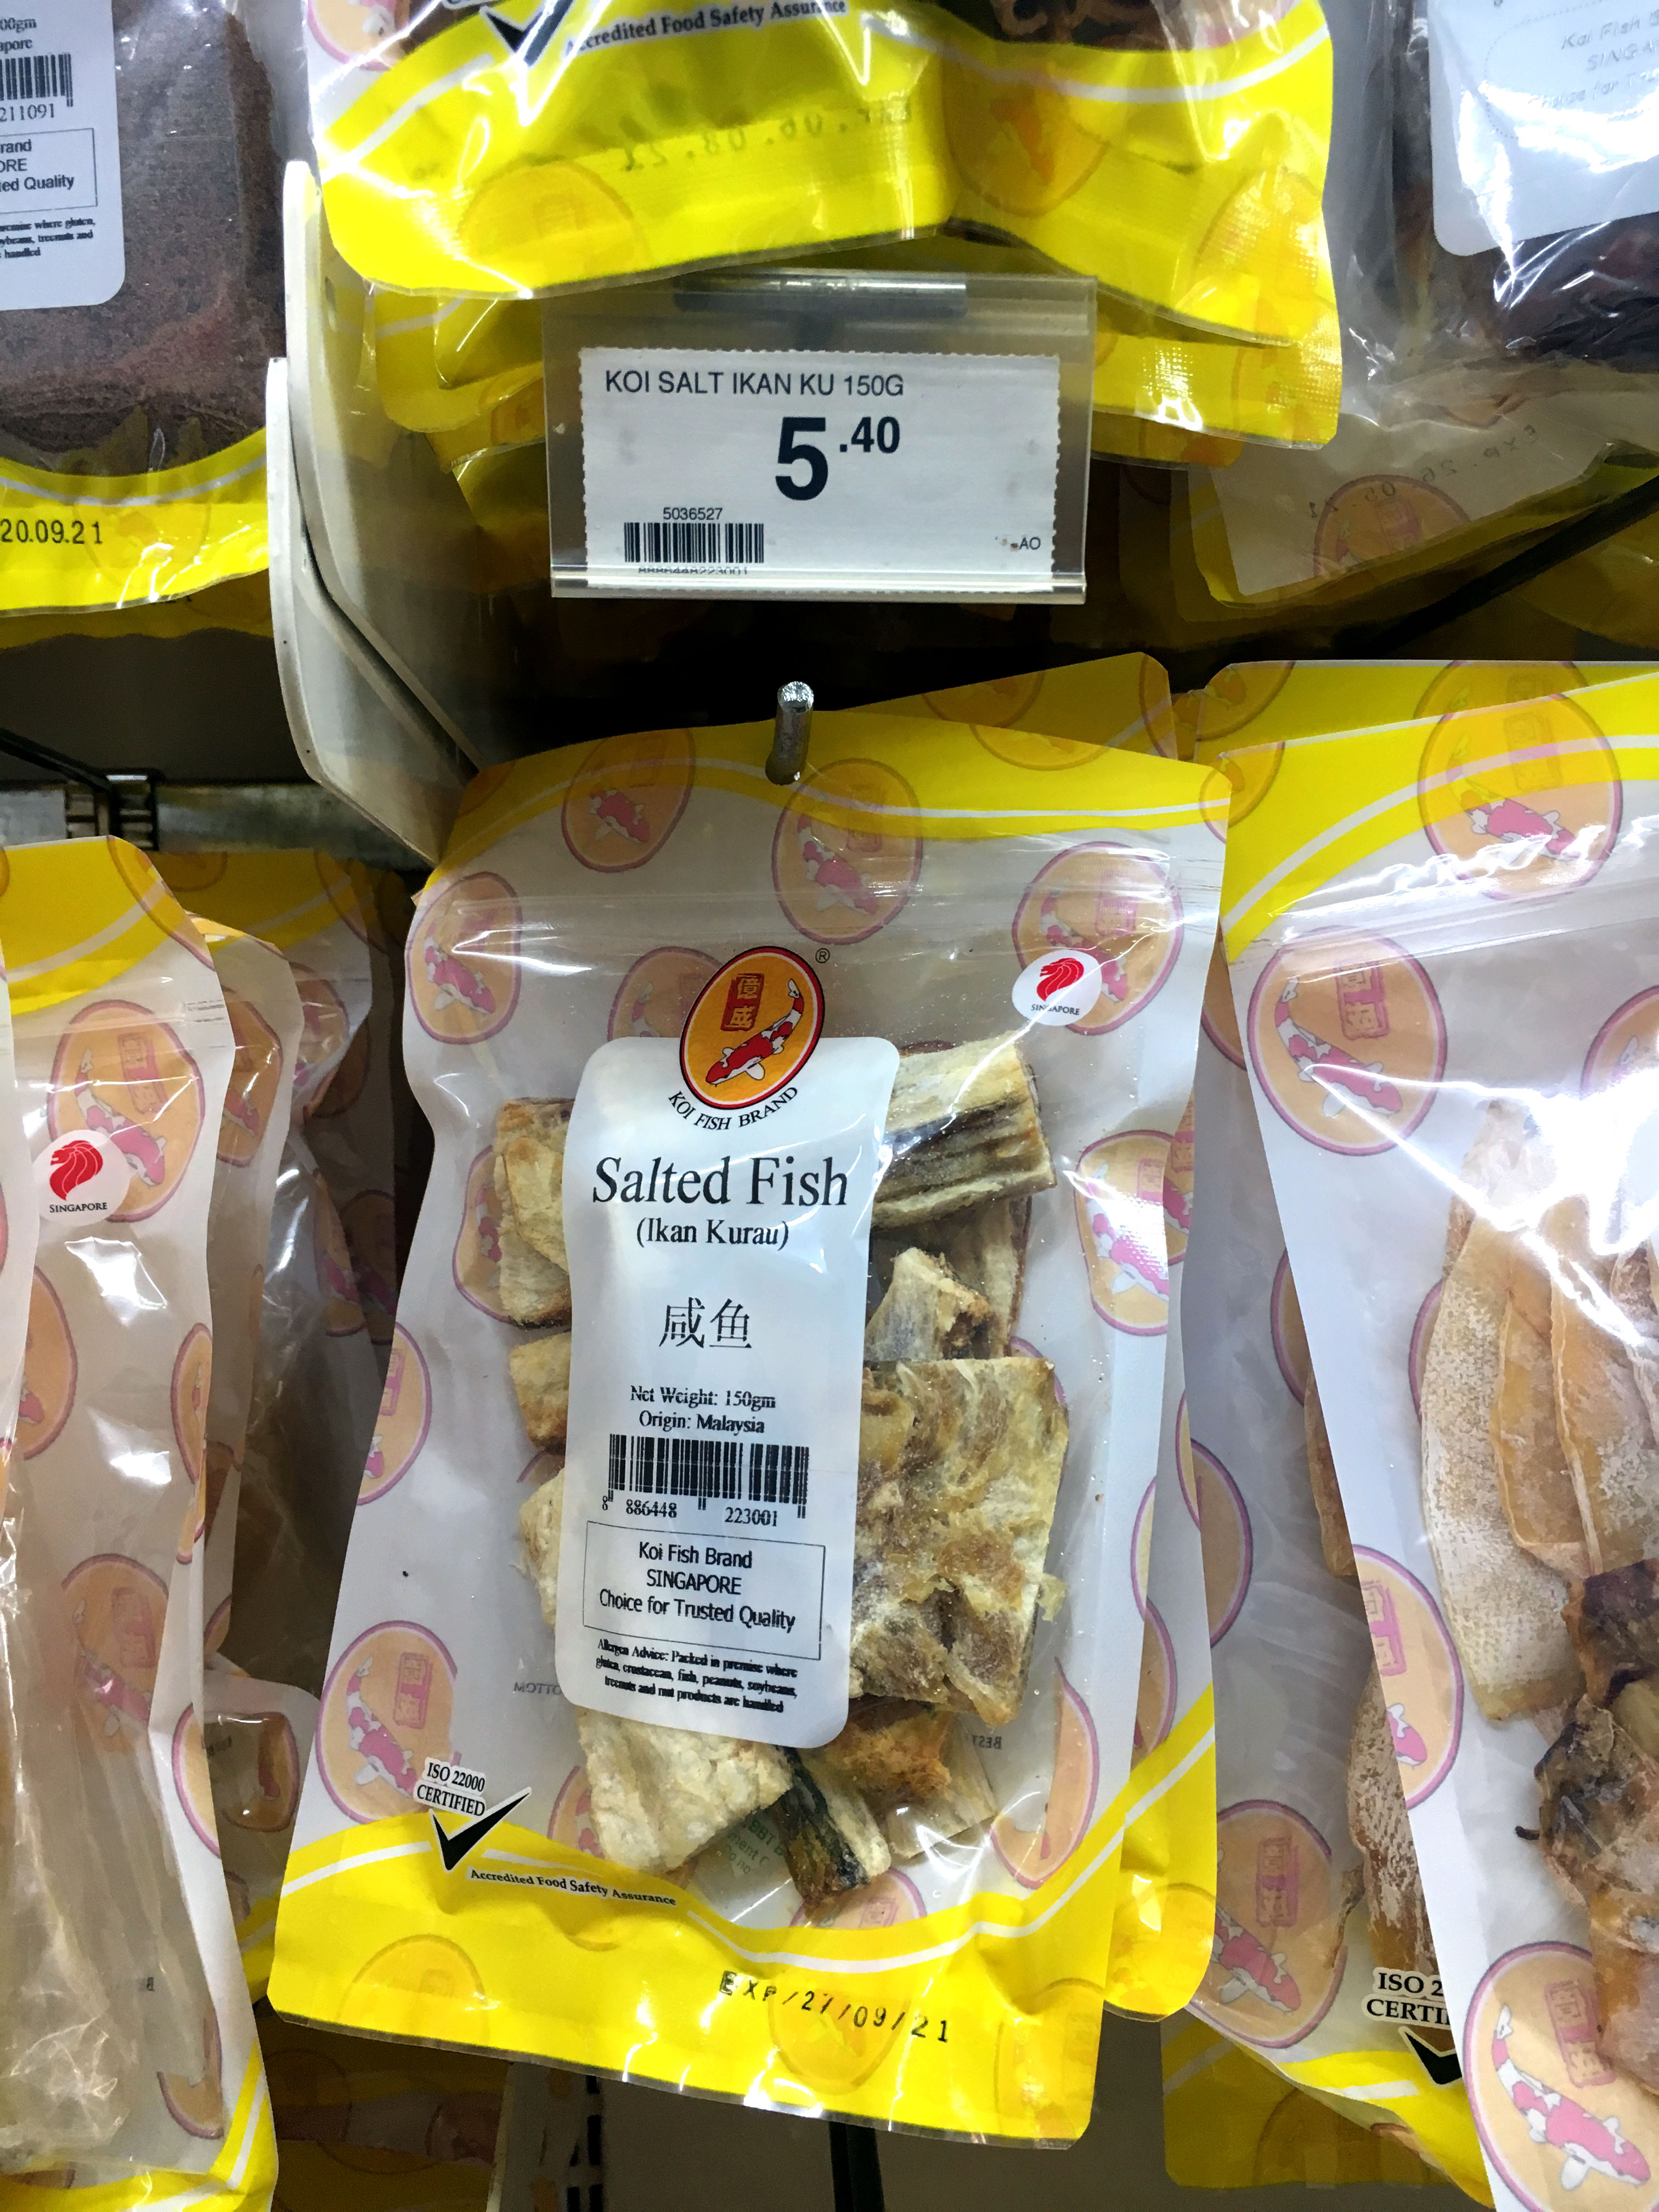 Salted Fish in the Supermarket, 2020. Source: Author